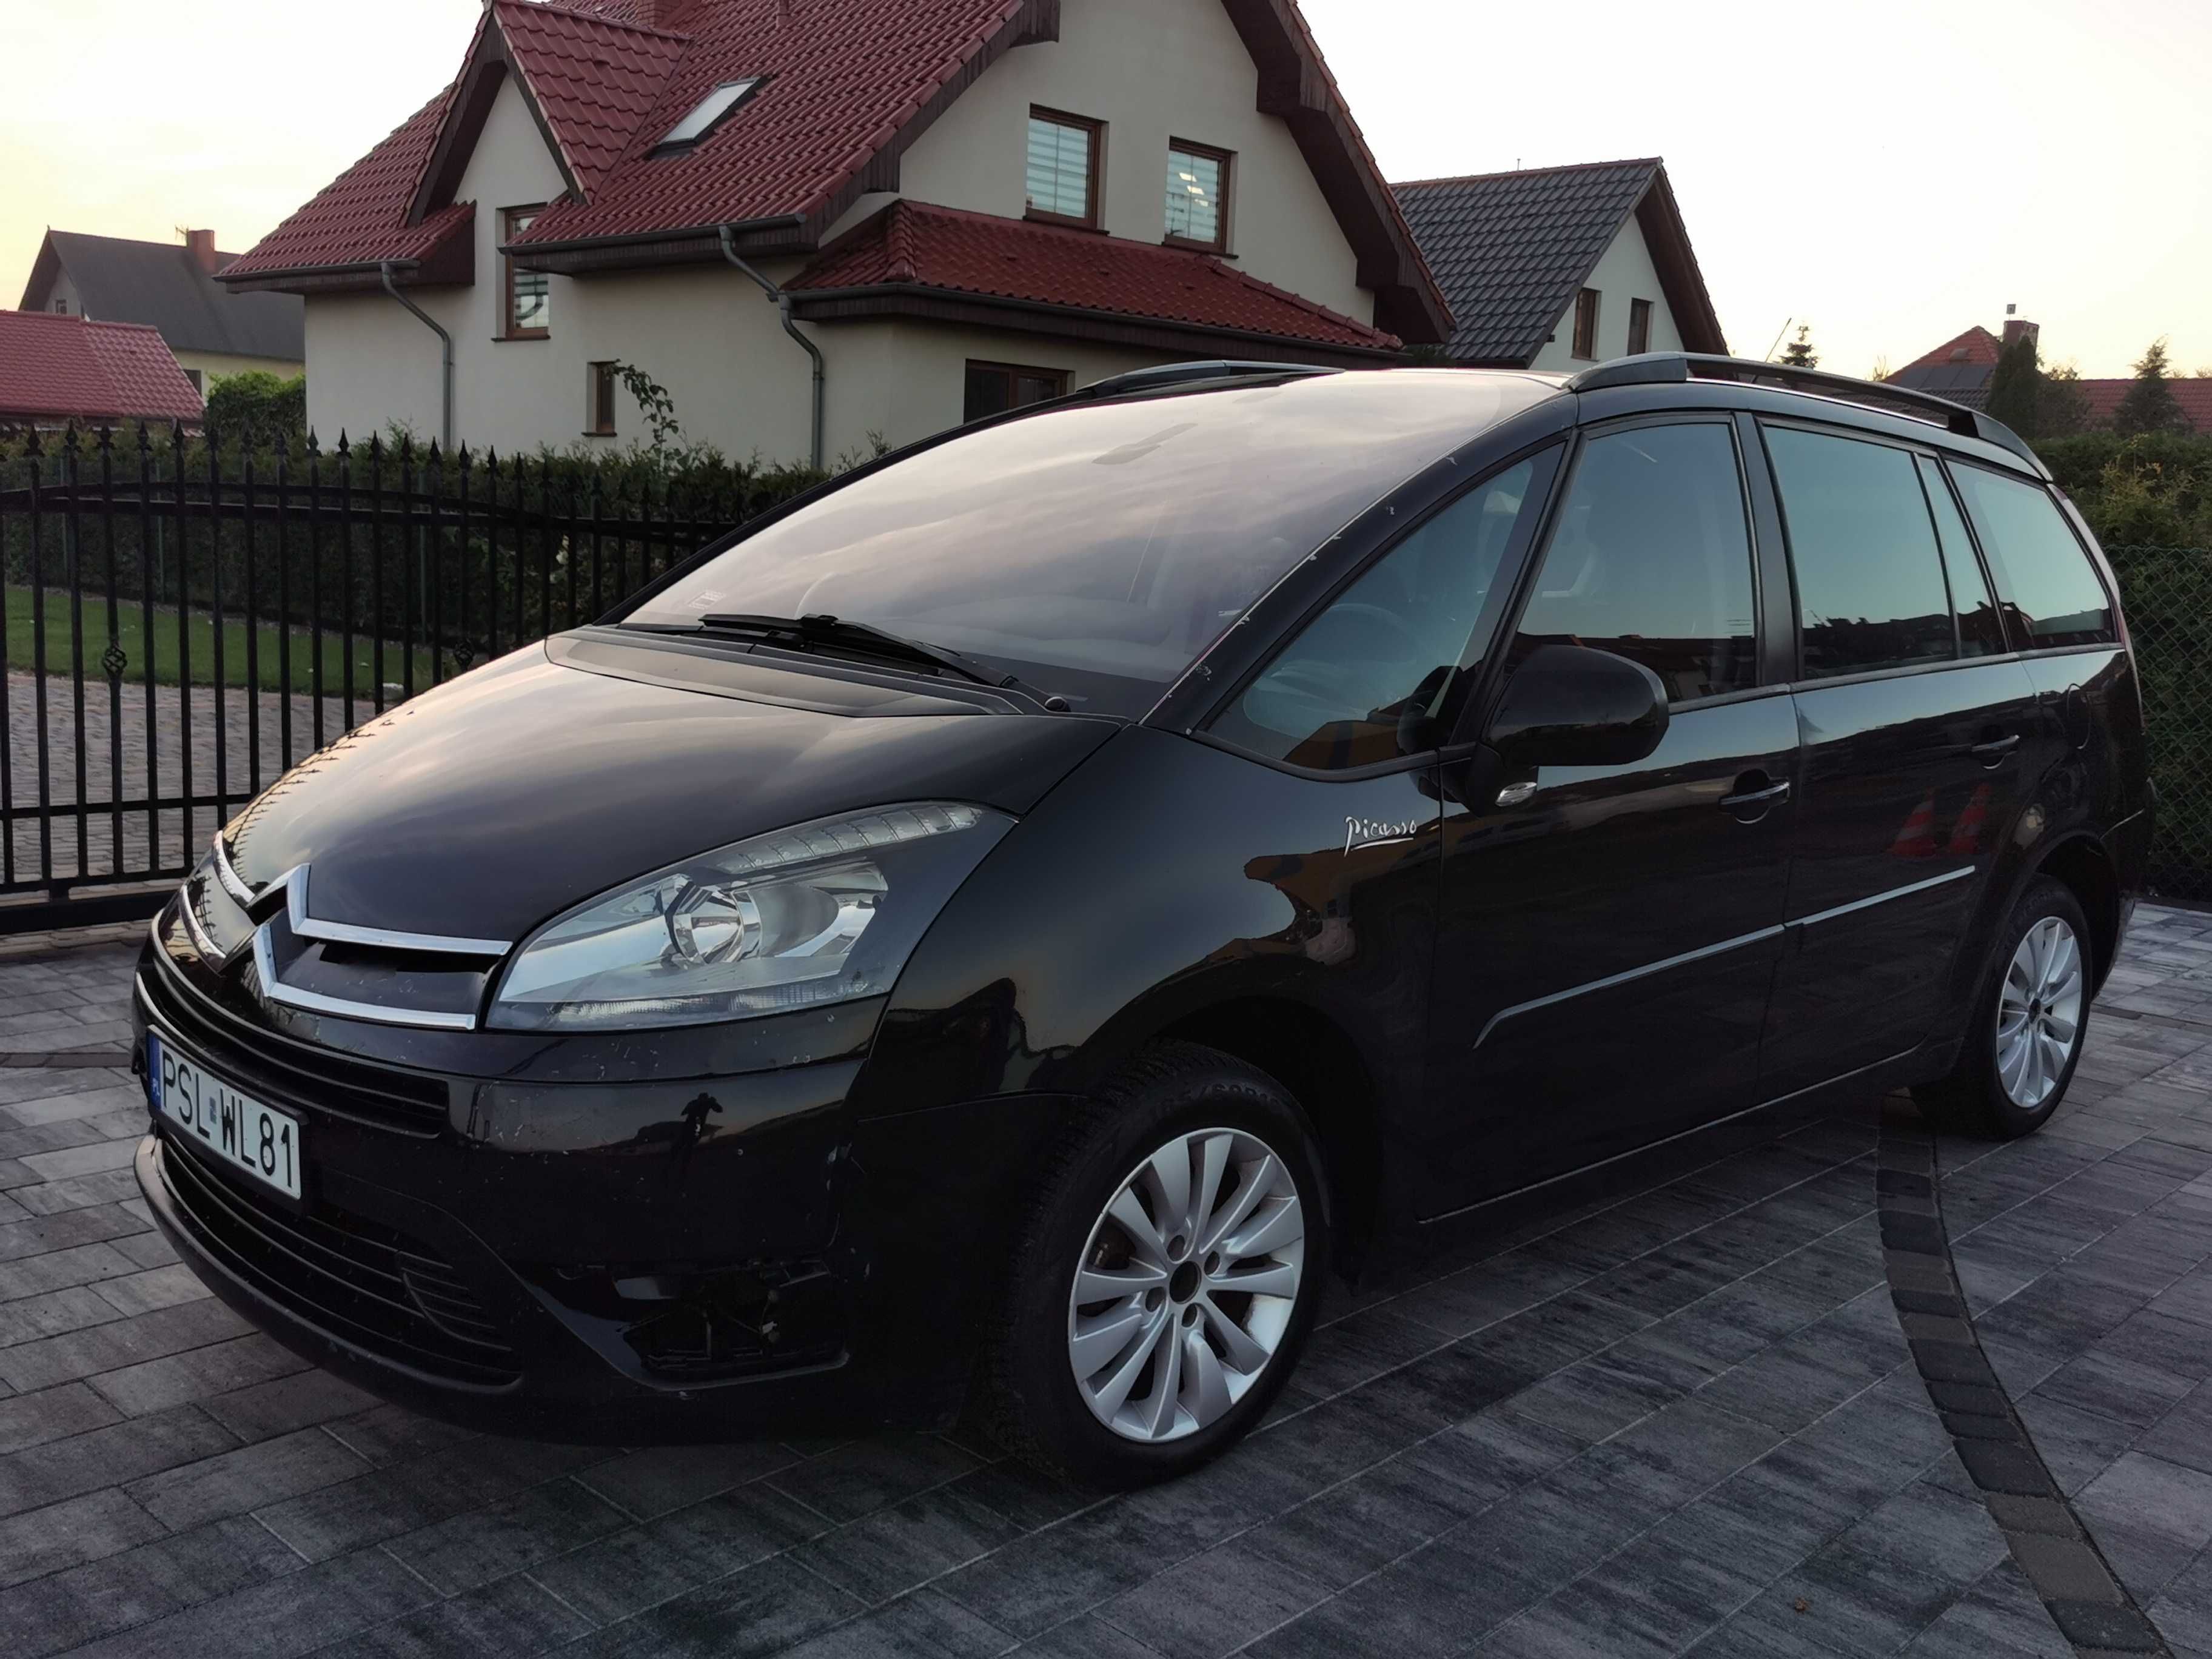 Citroen C4 Picasso 1.6 HDi automat 7 os.